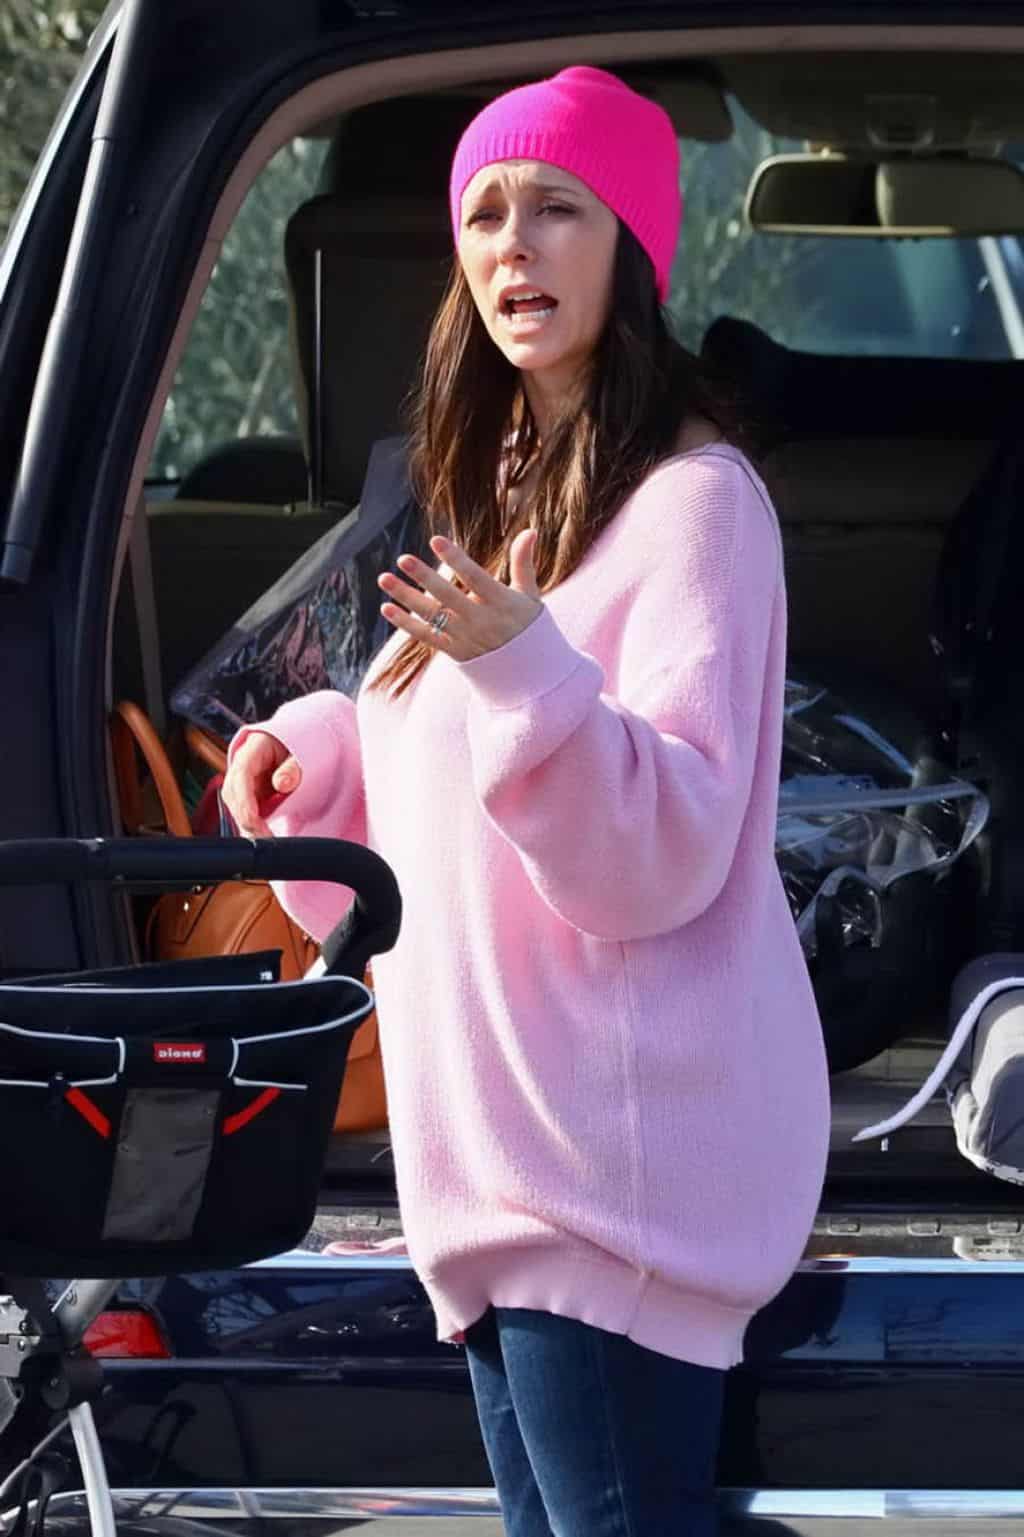 Jennifer Love Hewitt Shines in Makeup-Free Look and Cozy Pink Sweater